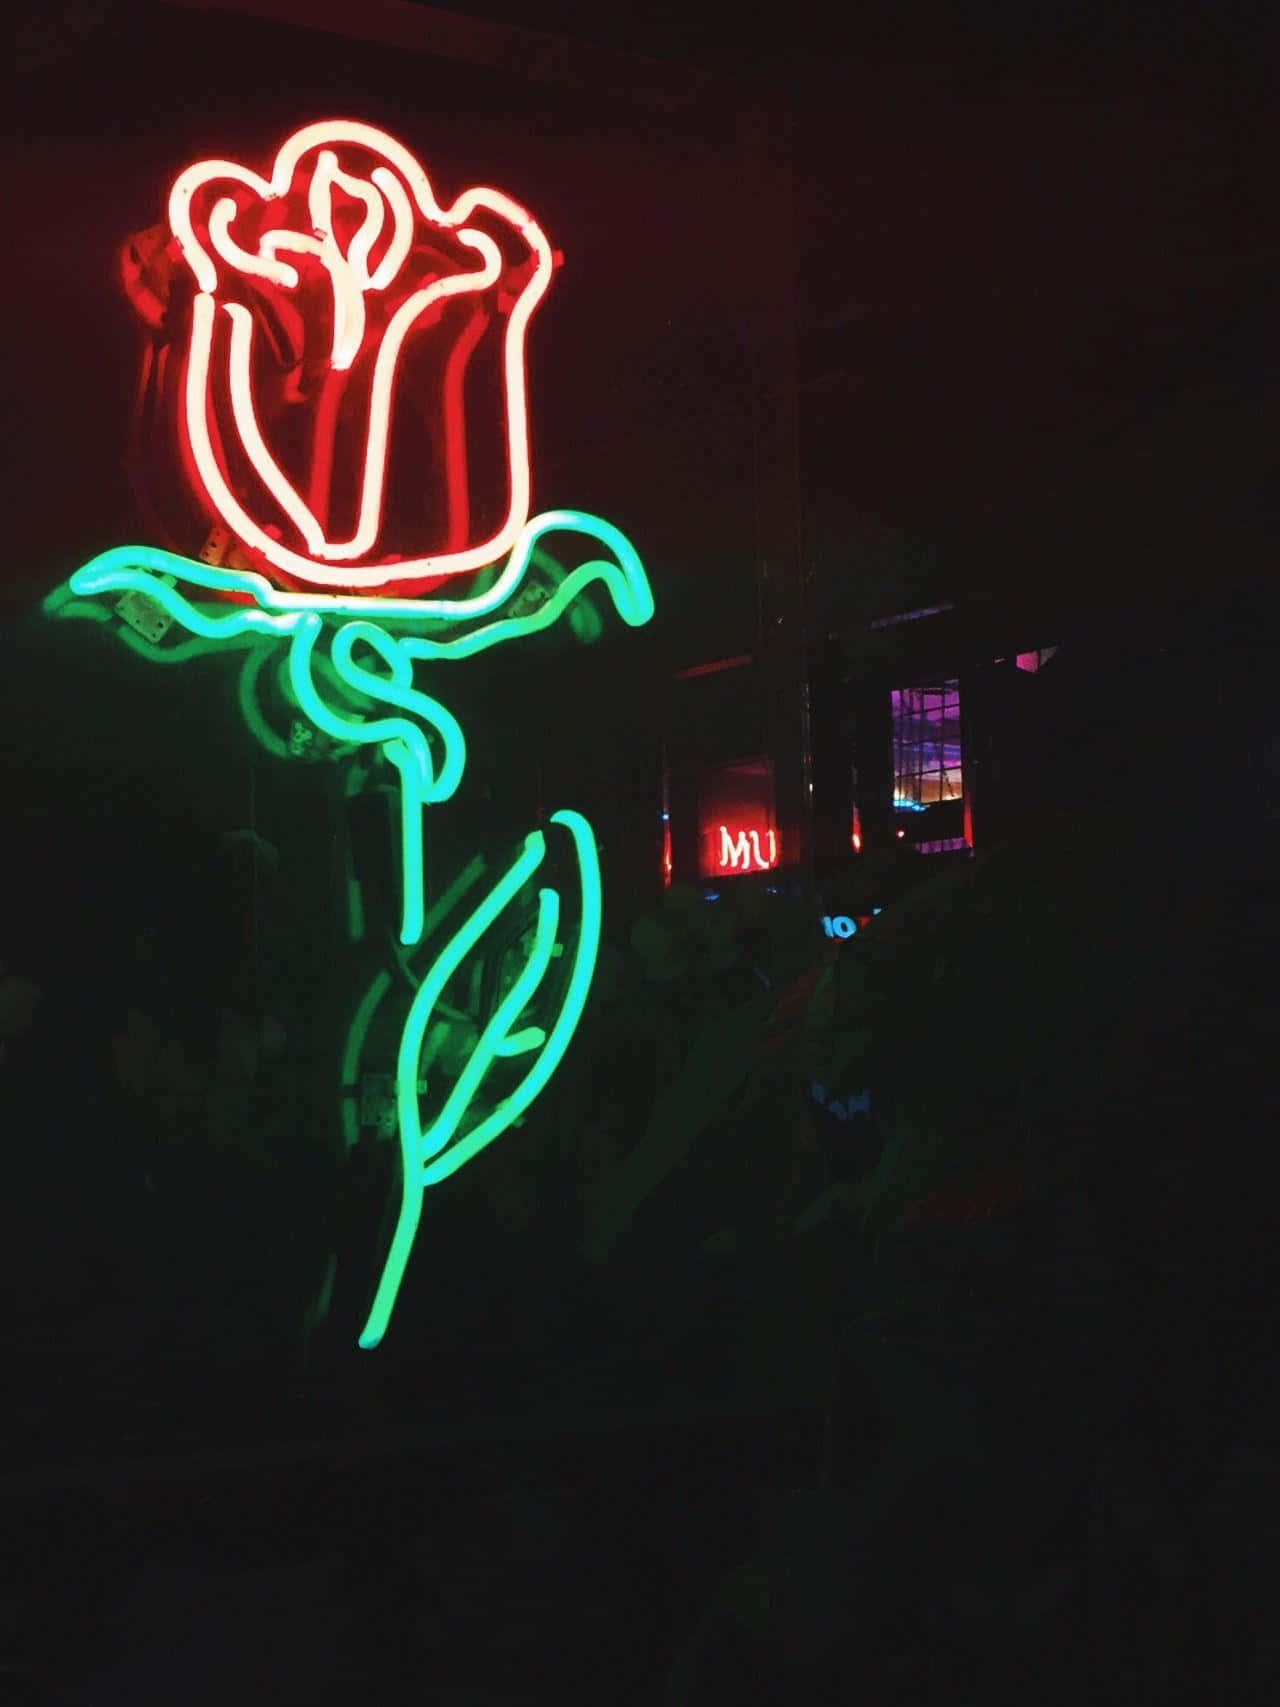 Let the neon lights guide you and show you the way